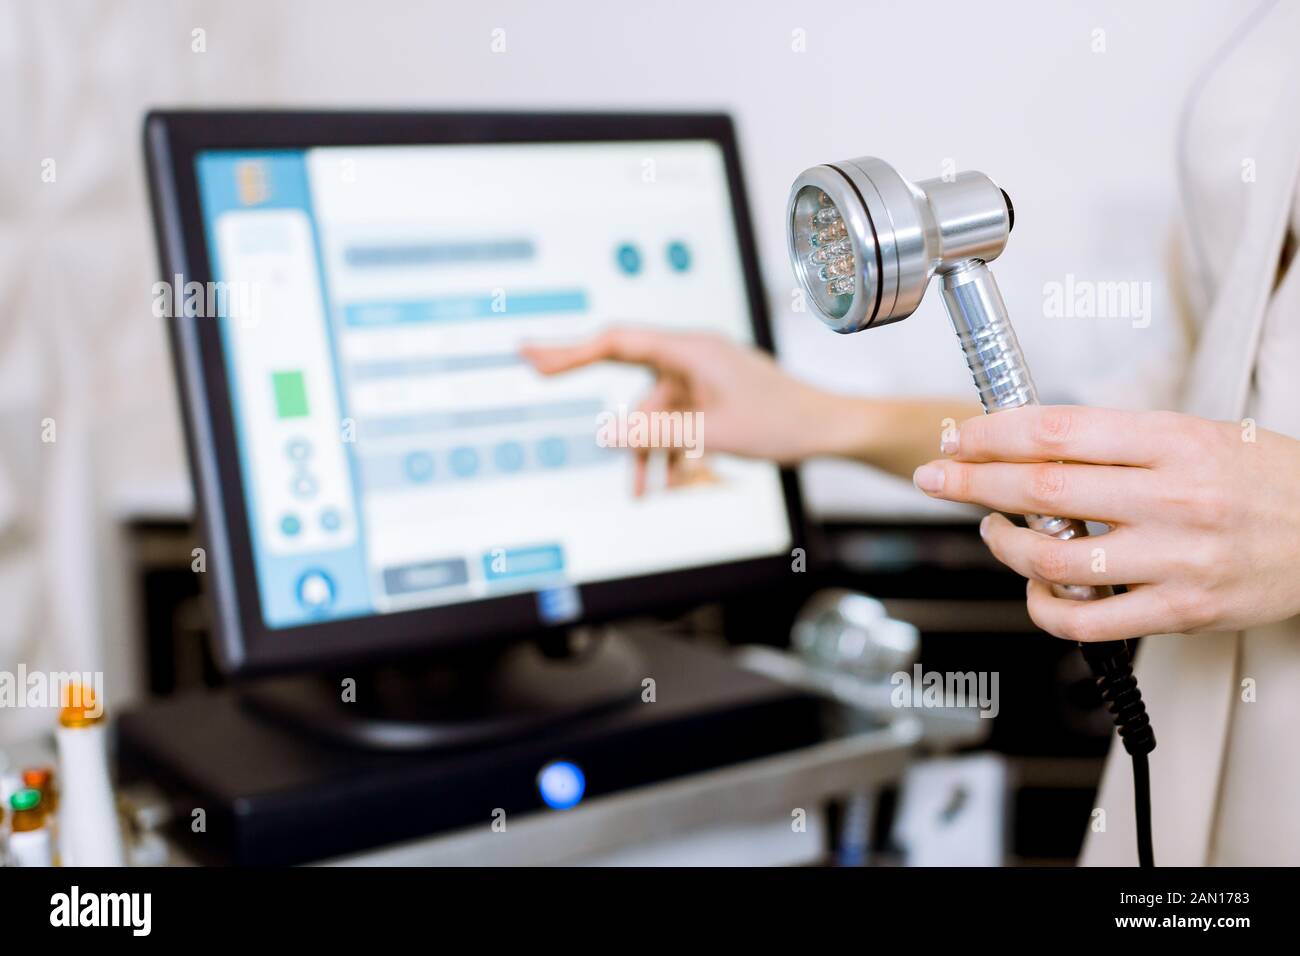 Facial Beauty Treatment. Cropped image of hand of professional woman cosmeolotgist holding a tool for Led Light Therapy, Anti-aging treatments and Stock Photo